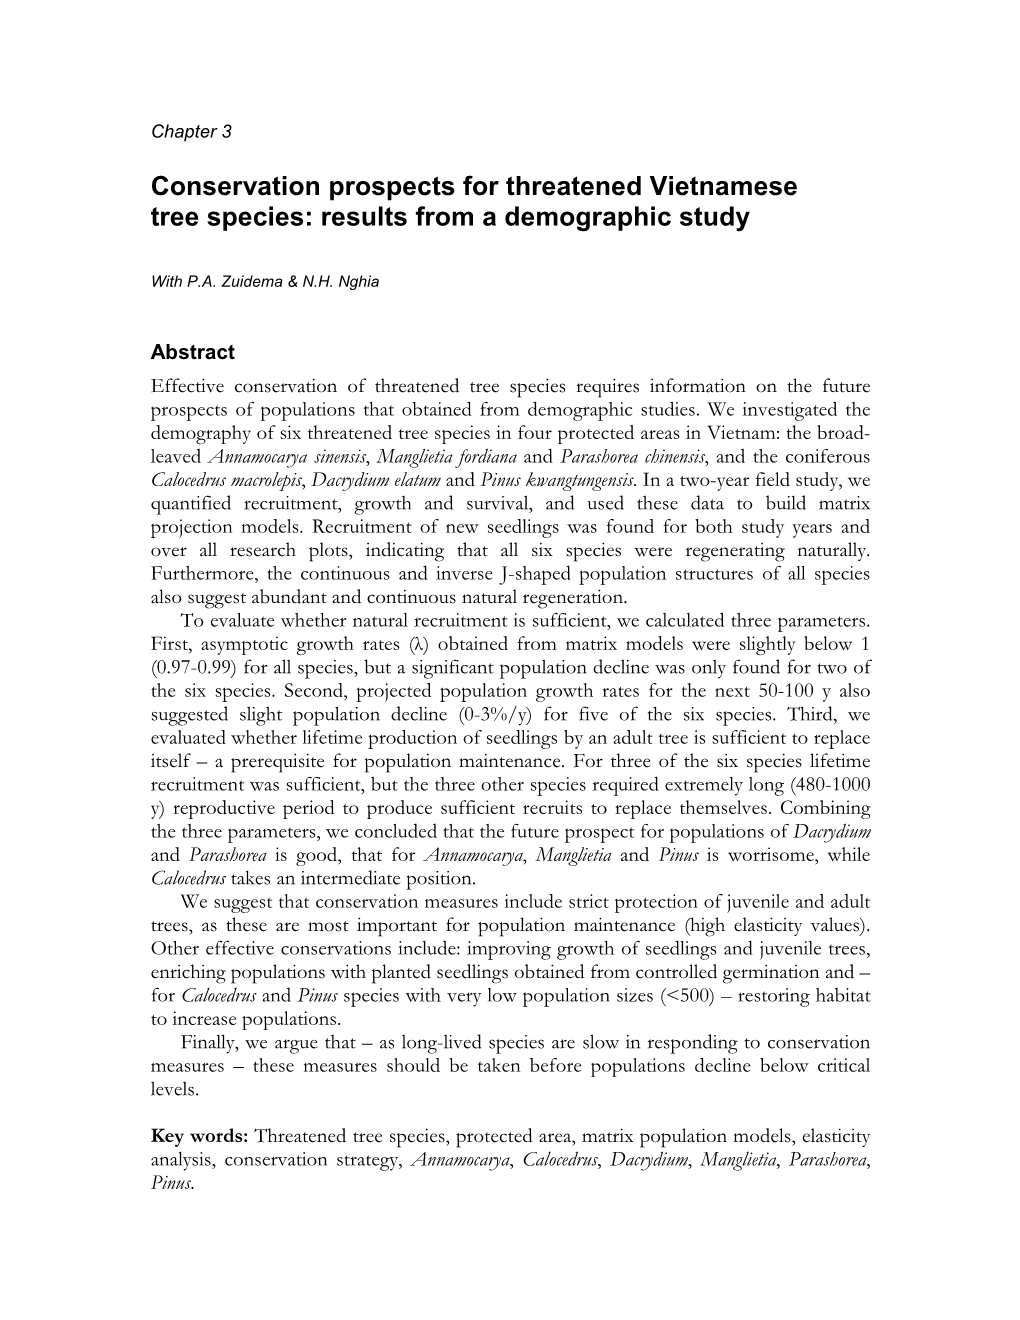 Conservation Prospects for Threatened Vietnamese Tree Species: Results from a Demographic Study � � with P.A